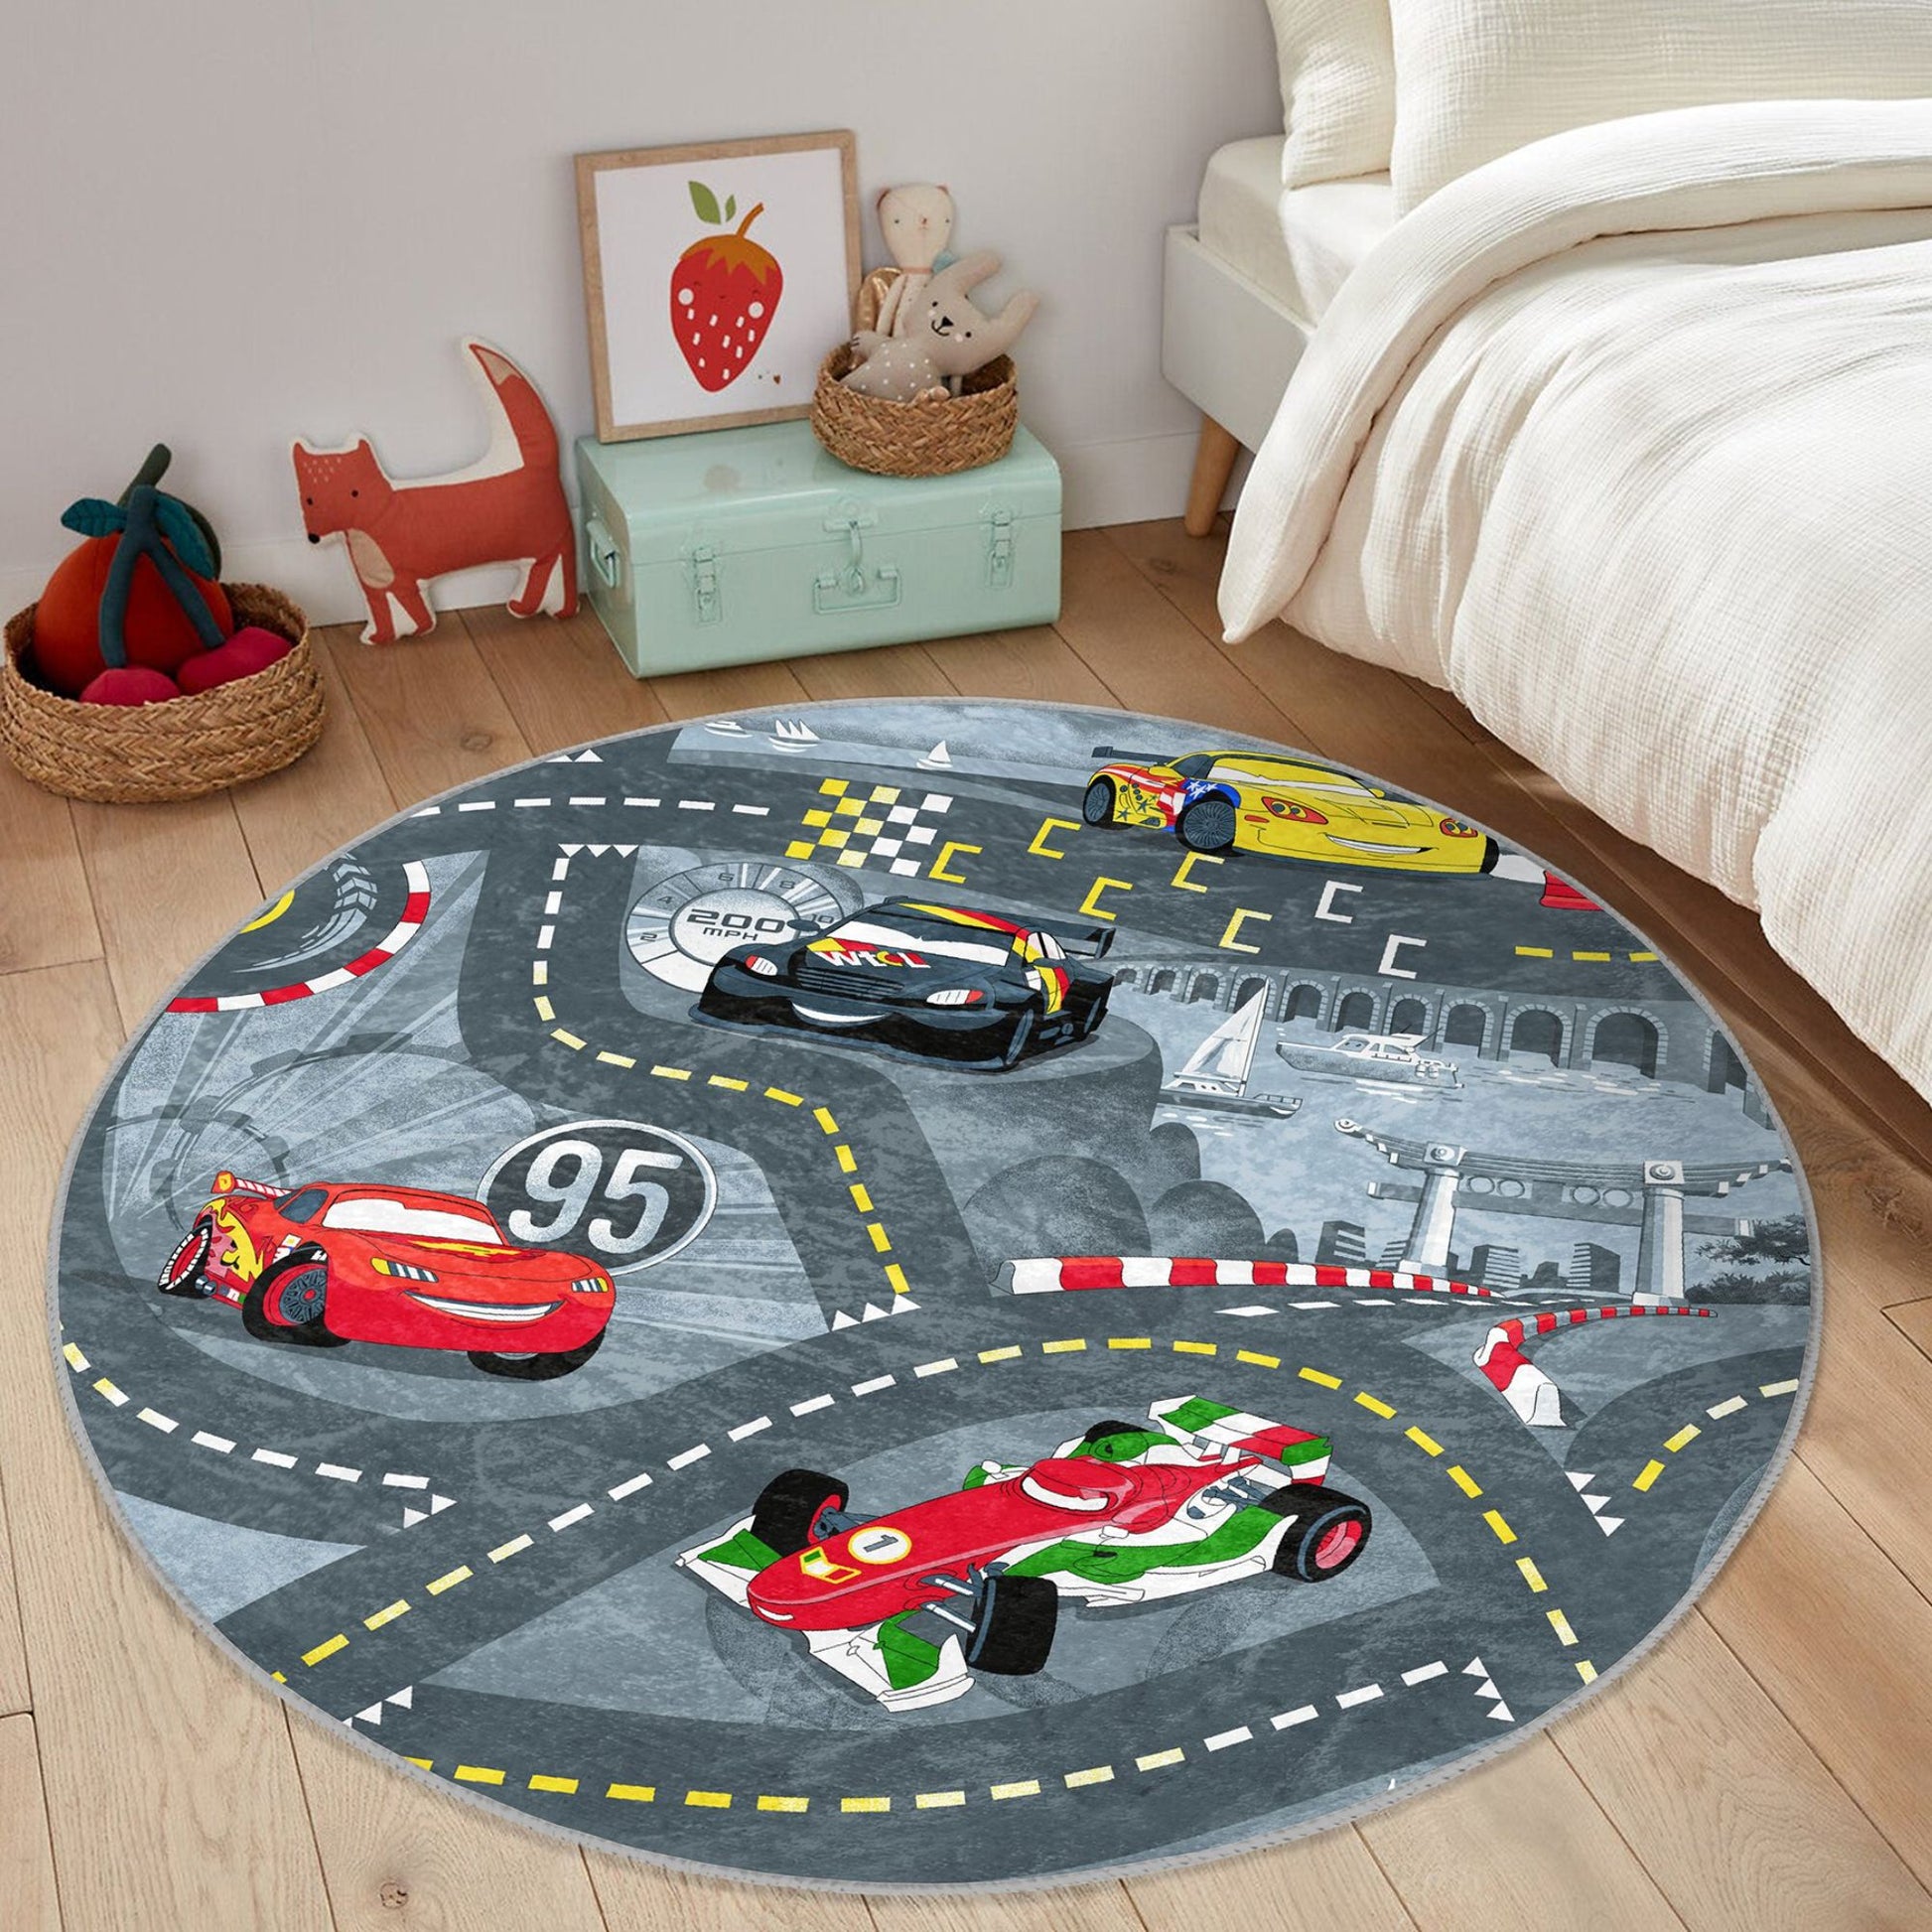 Colorful and Exciting Boys' Room Decor with Race Car Theme